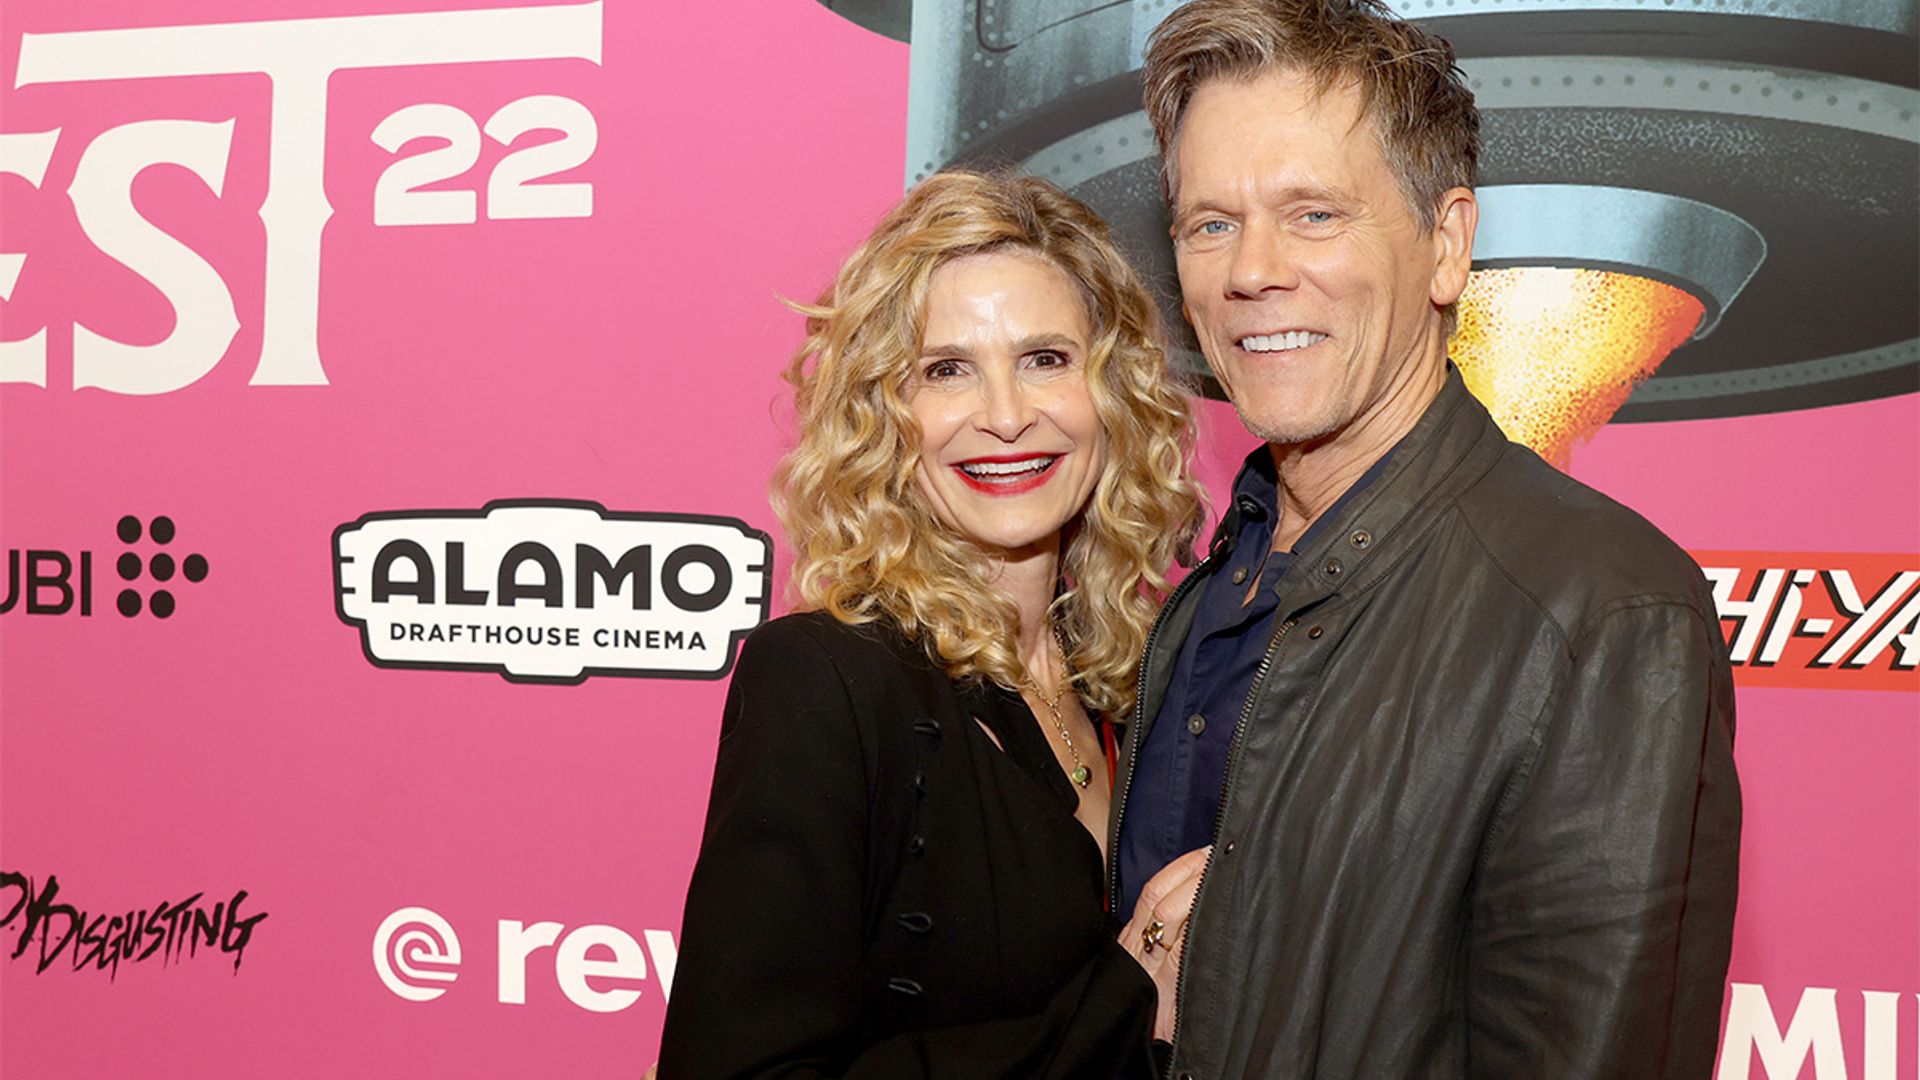 Kevin Bacon and Kyra Sedgwick's appearance causes a stir in rare selfie together